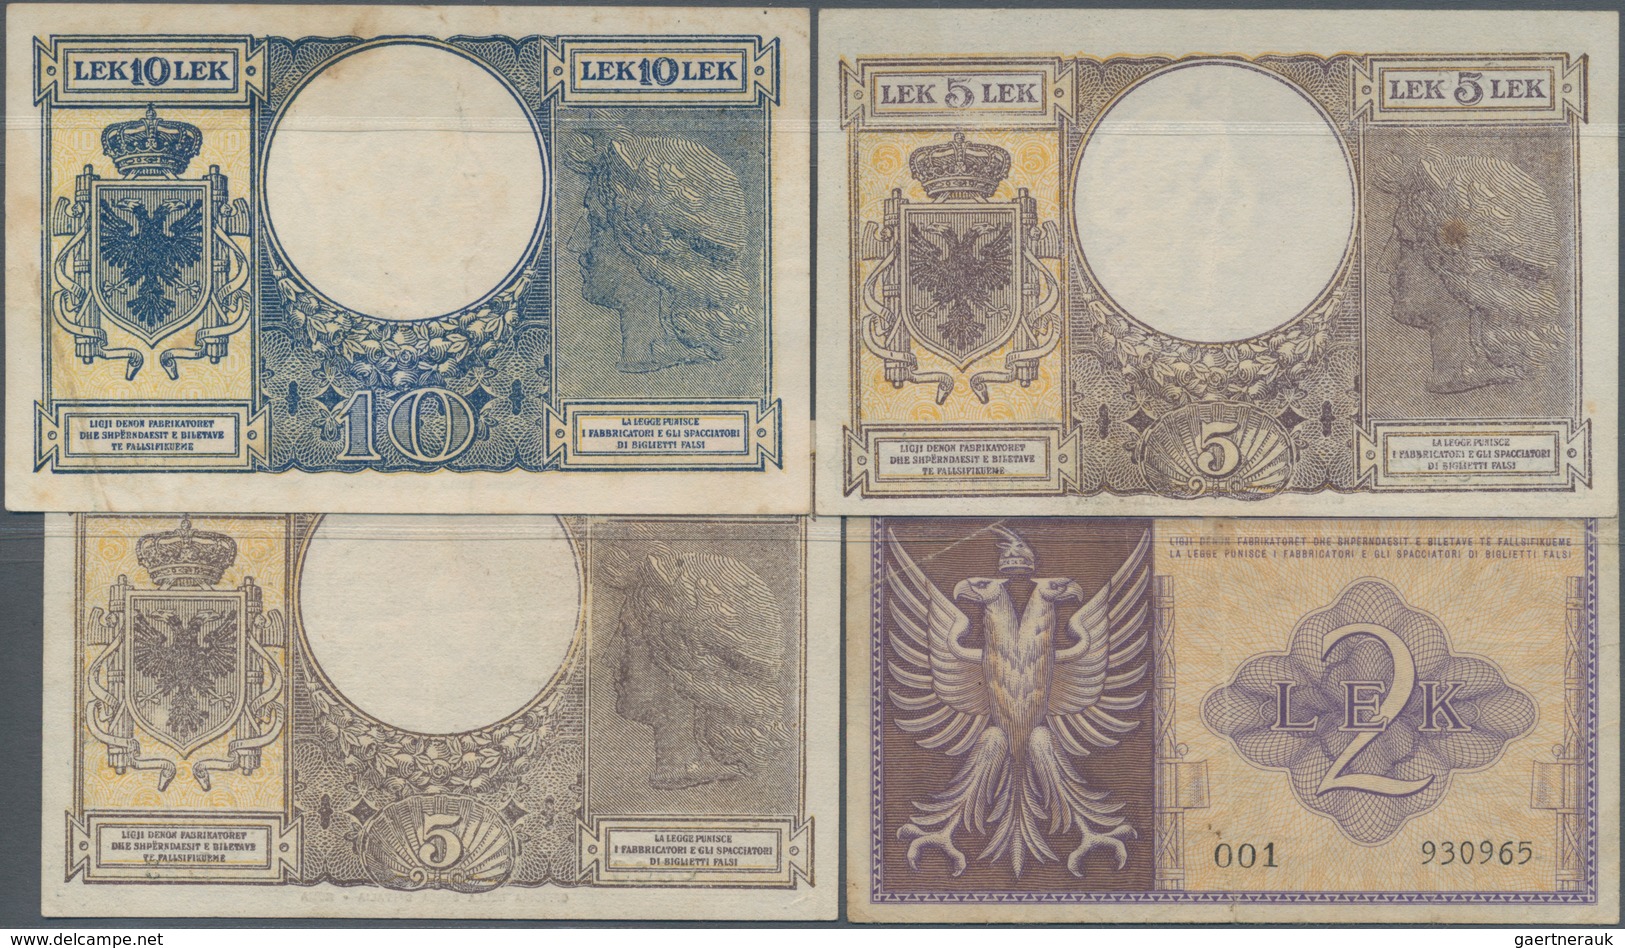 Albania / Albanien: 2, 2x 5 And 10 Lek ND(1940-42), P.9, 10, 11 In VF To XF Condition. (4 Pcs.) - Albanien